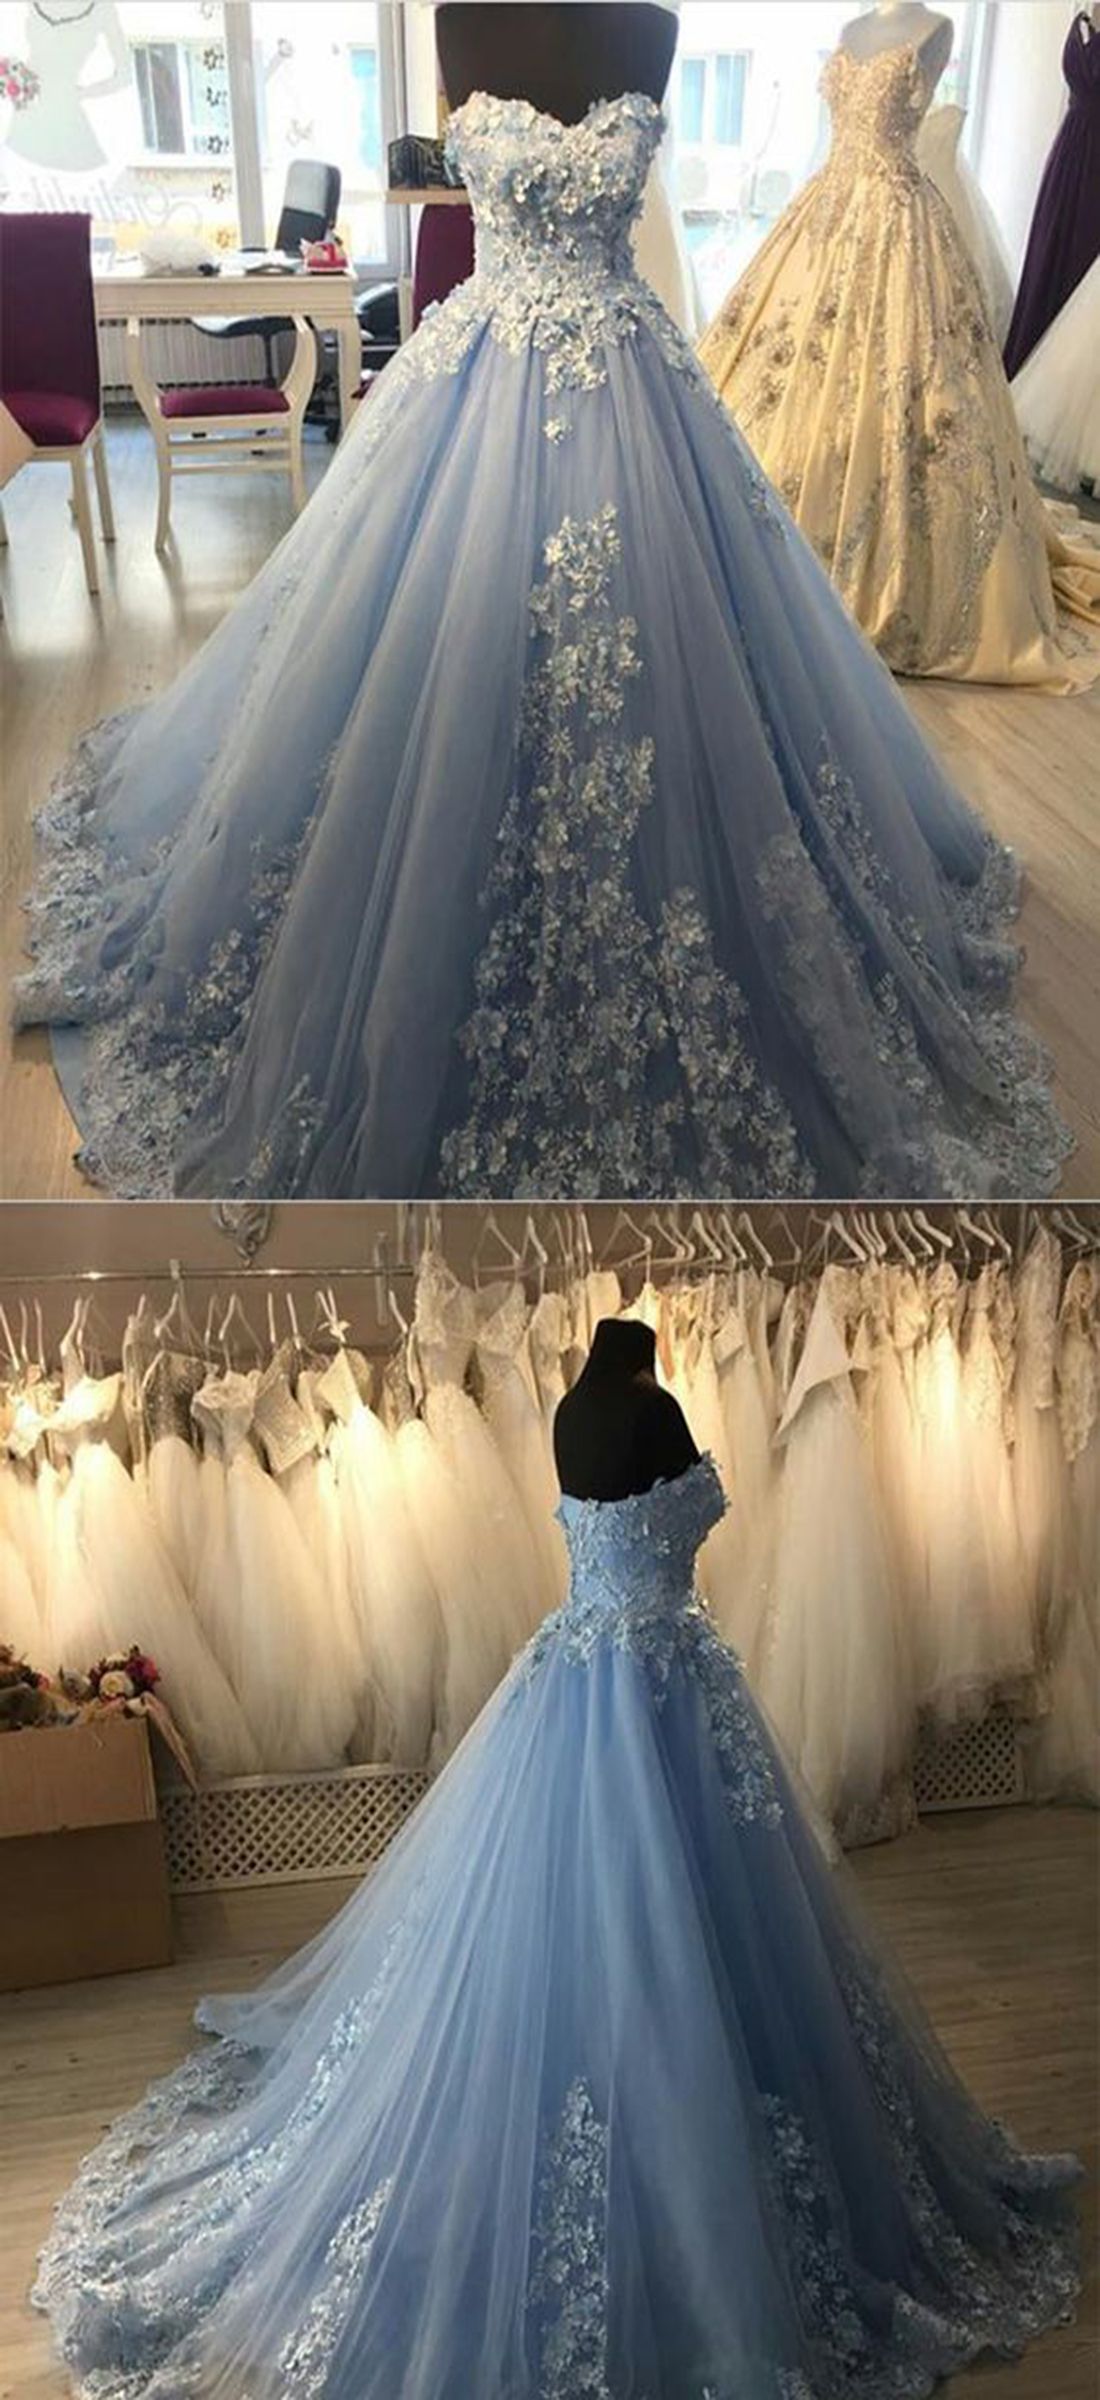 Princess Light Blue Appliques Quinceanera Dress,Sweetheart Luxury Prom ...